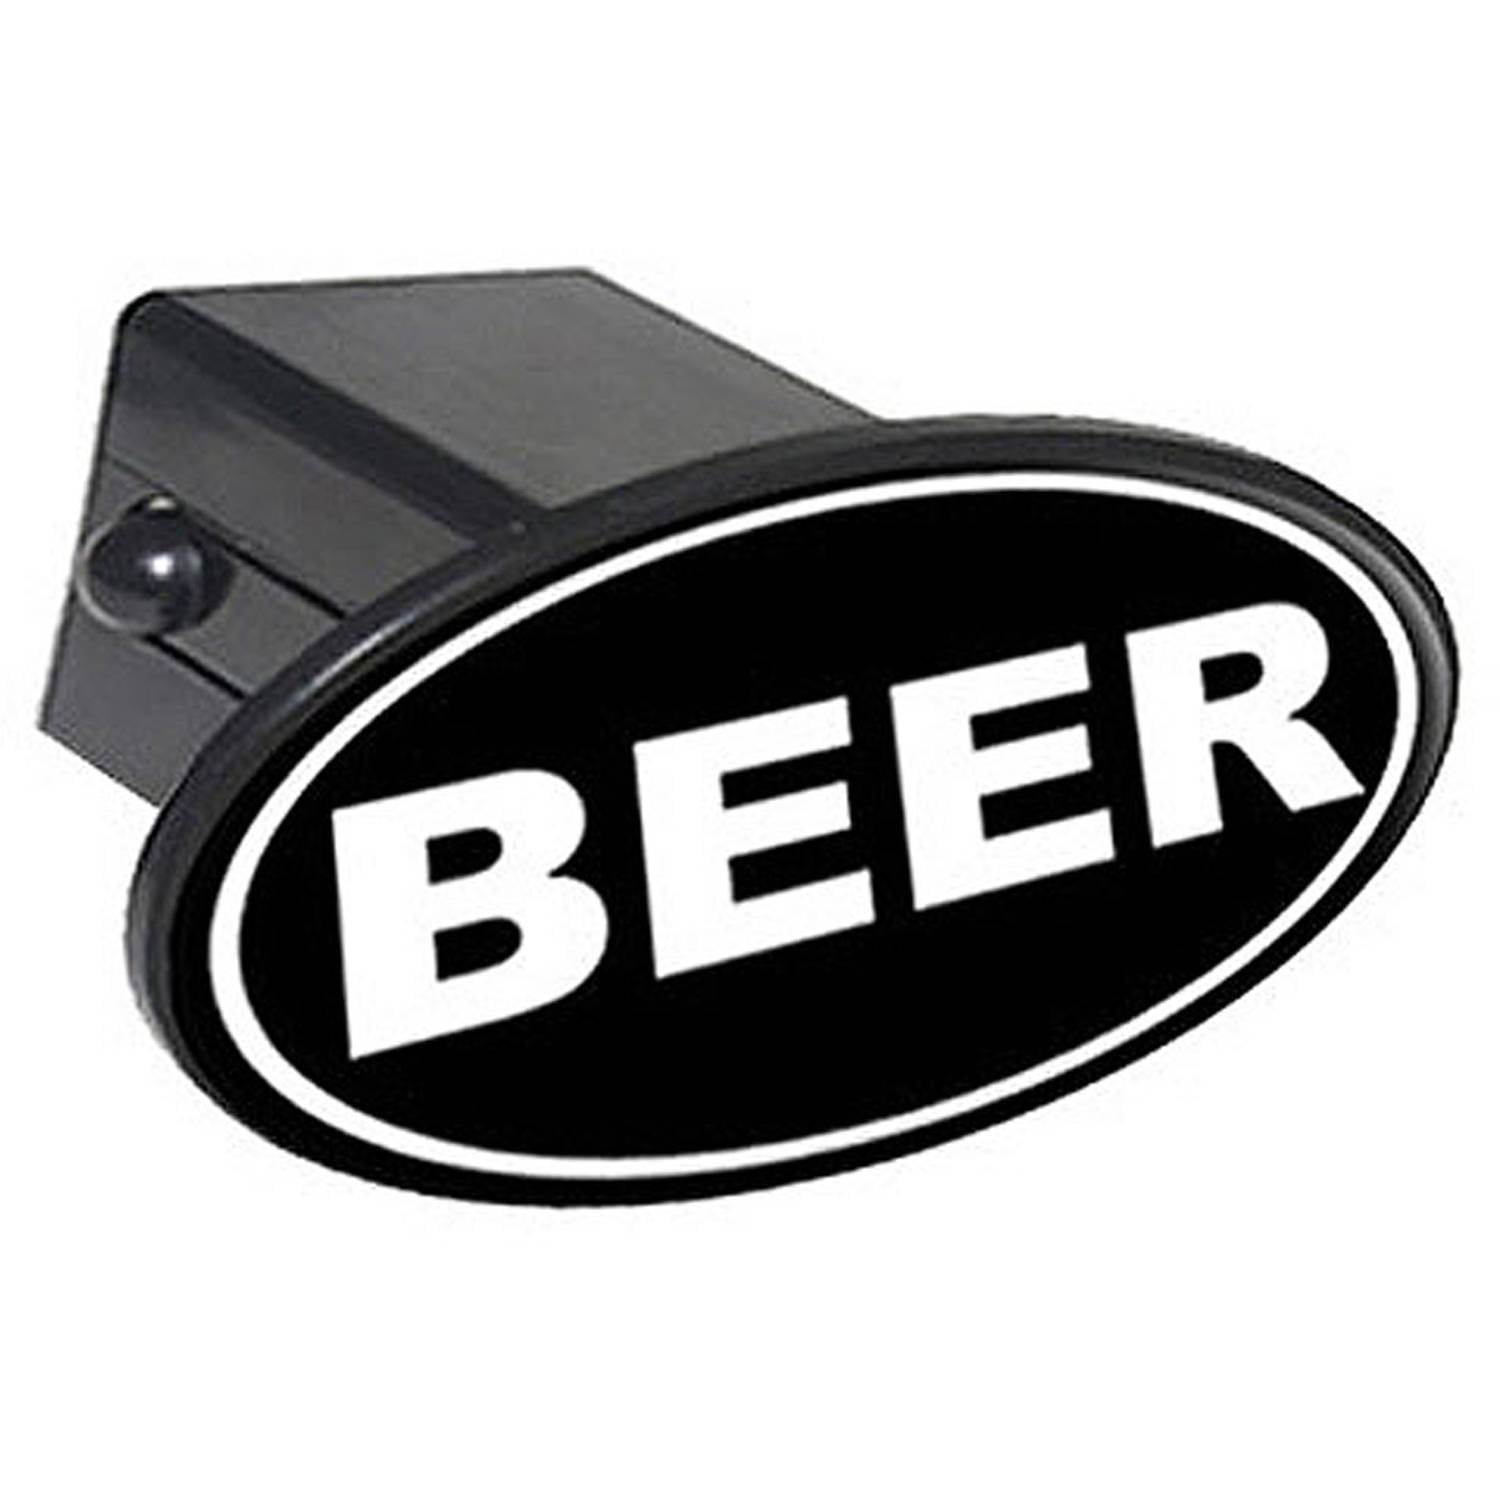 Drink More Beer Support Local Leprechauns Oval Tow Trailer Hitch Cover Plug Insert 